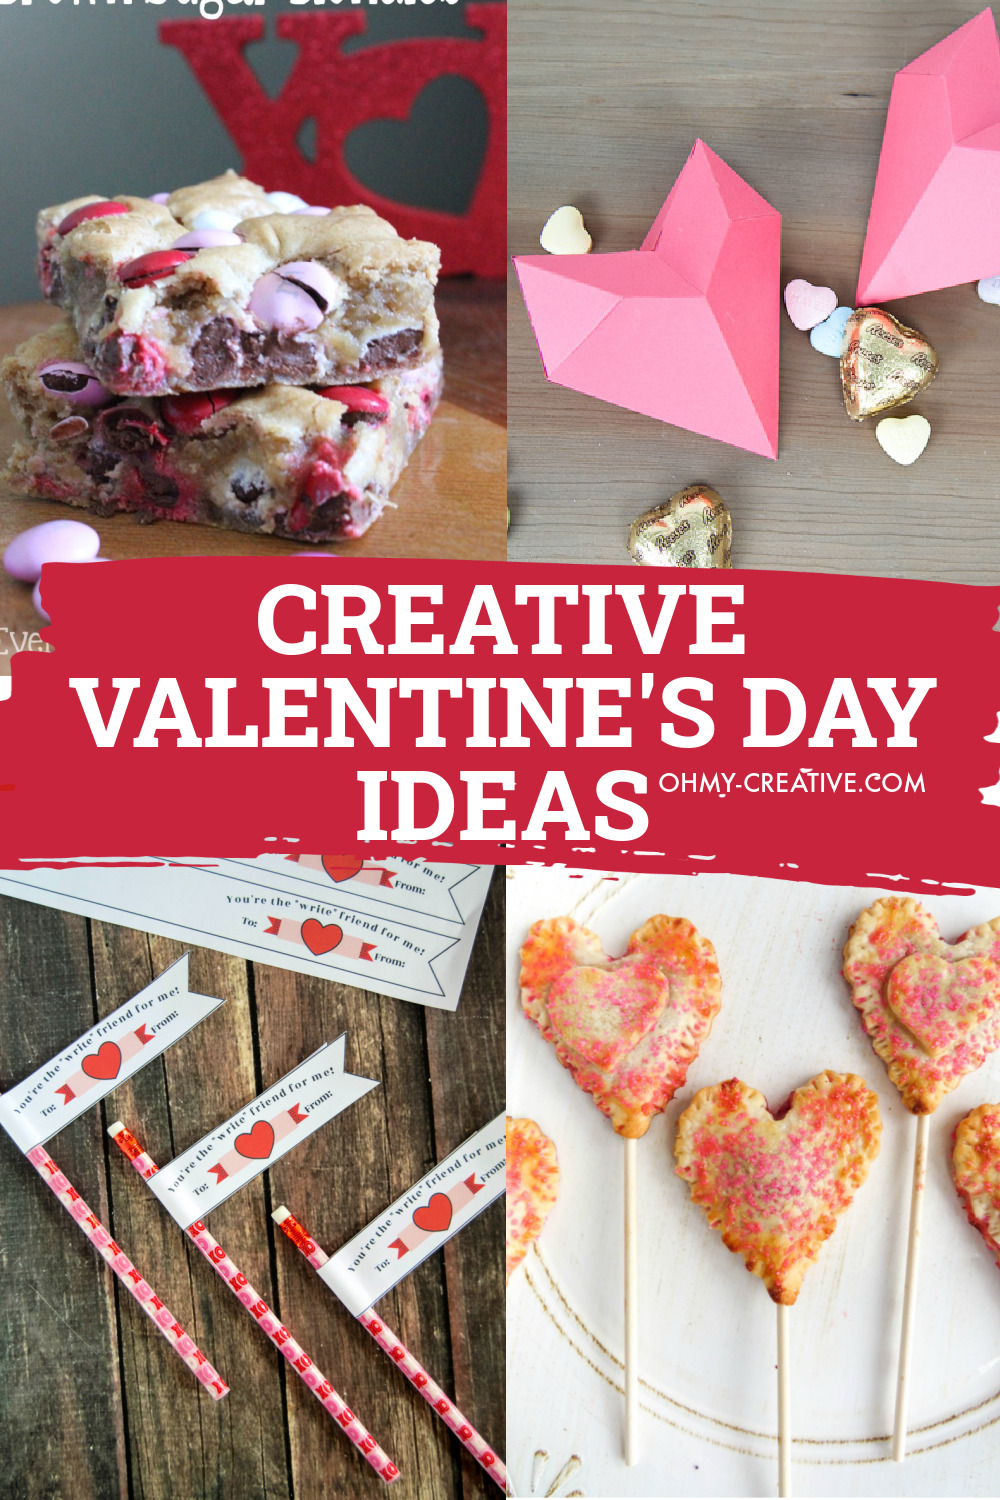 A collage of creative Valentine's Day ideas including recipes, free printables and Valentine's Day treats.